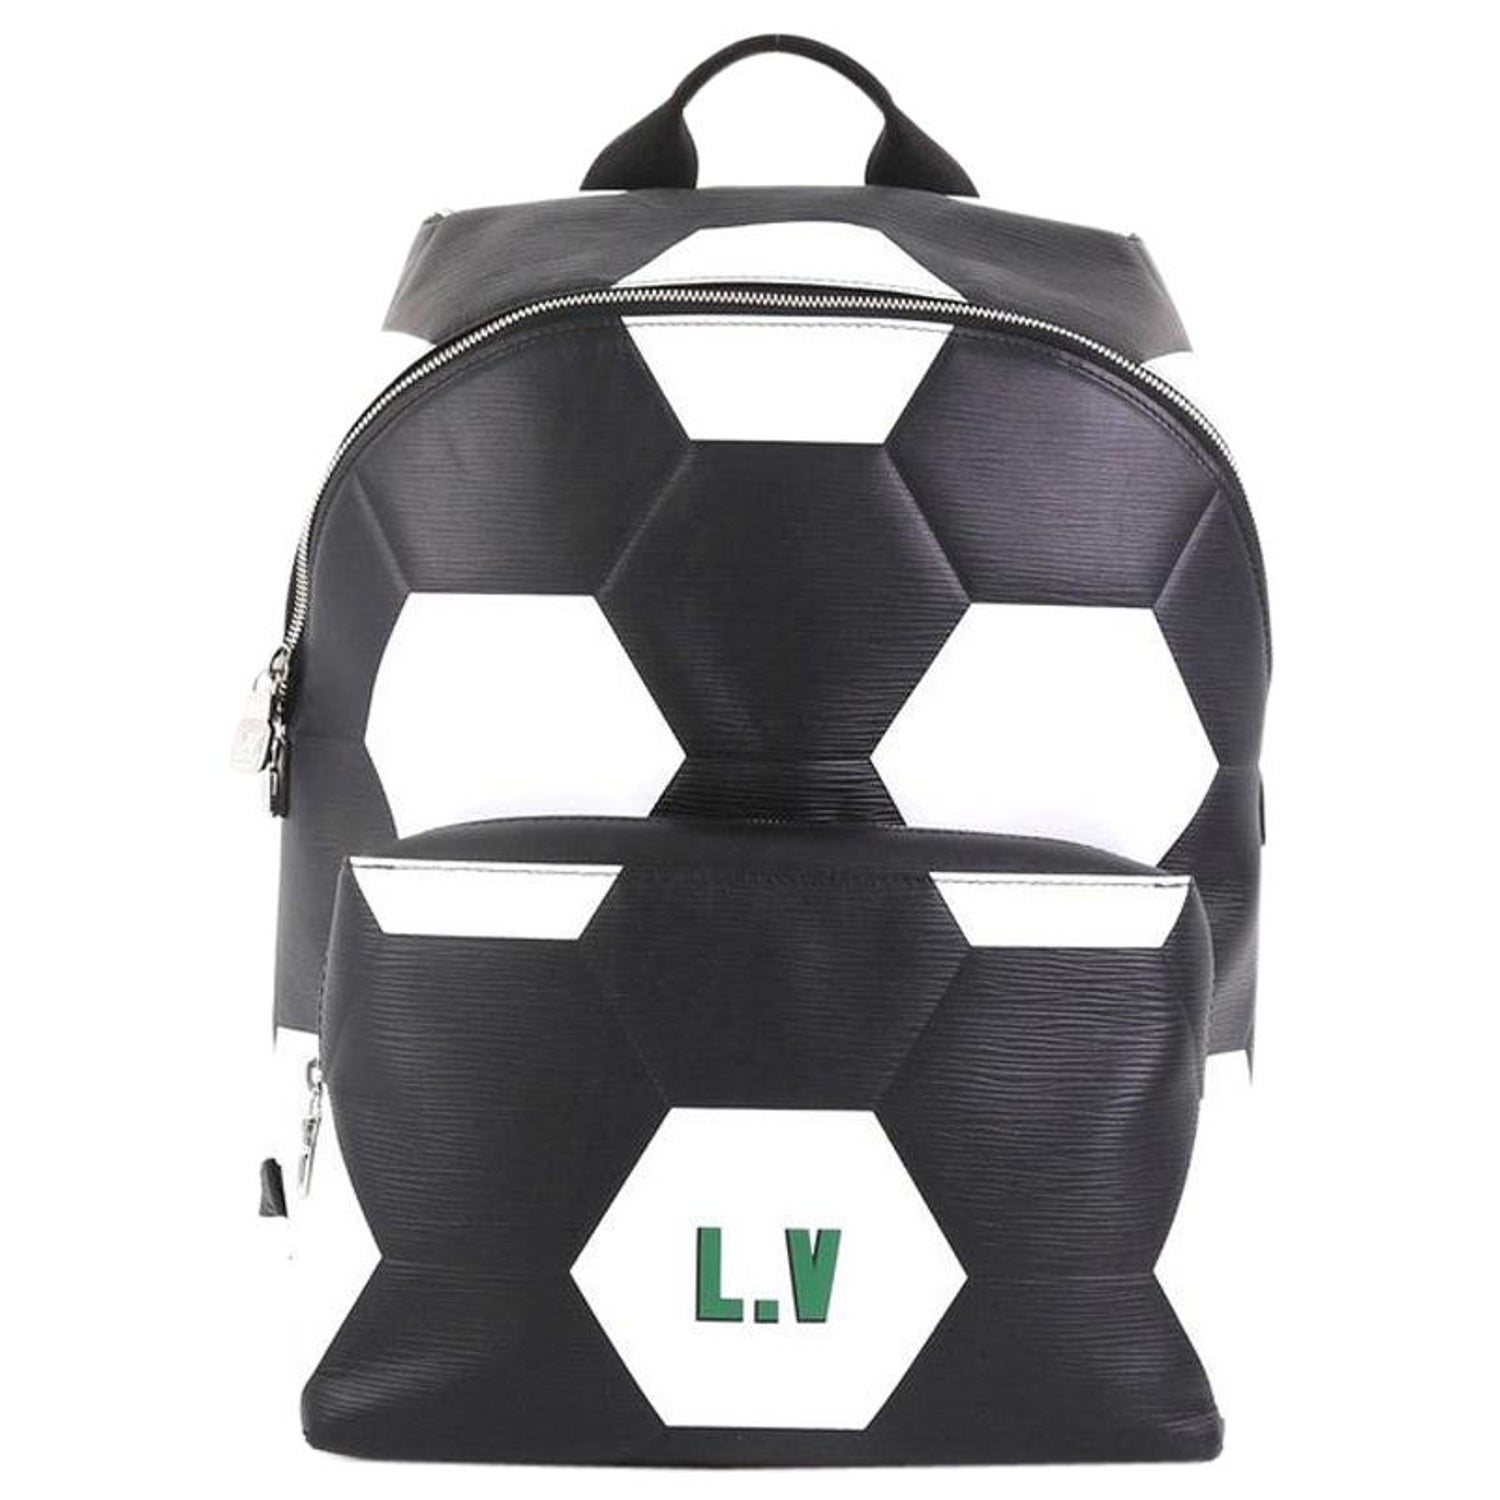 Louis Vuitton Football - For Sale on 1stDibs  lv football, football louis  vuitton, lui vuitton